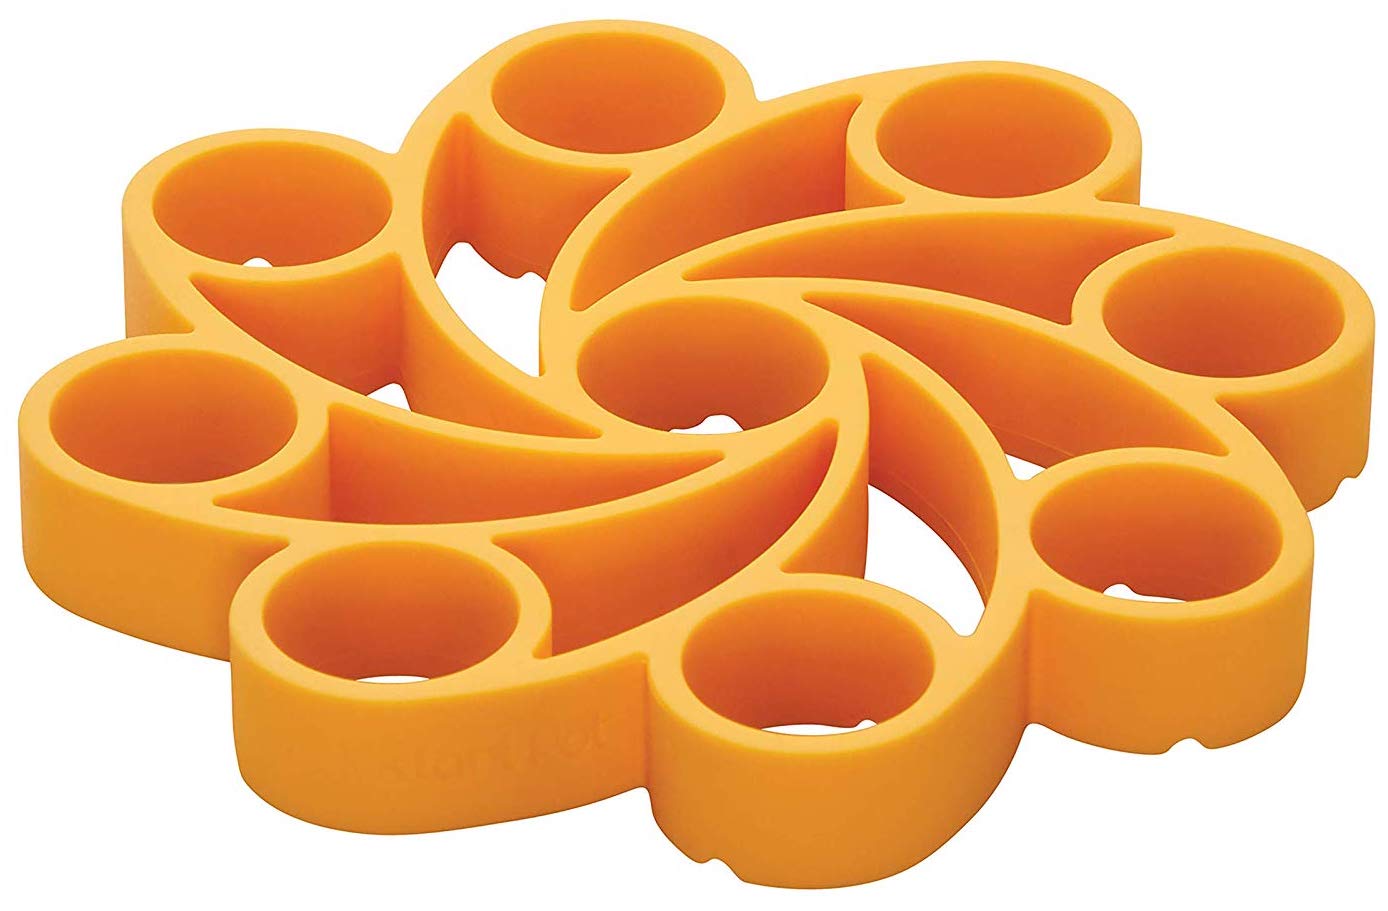 https://www.imore.com/sites/imore.com/files/field/image/2020/01/instant-pot-official-silicone-egg-rack.jpg?itok=fhHqbUTO